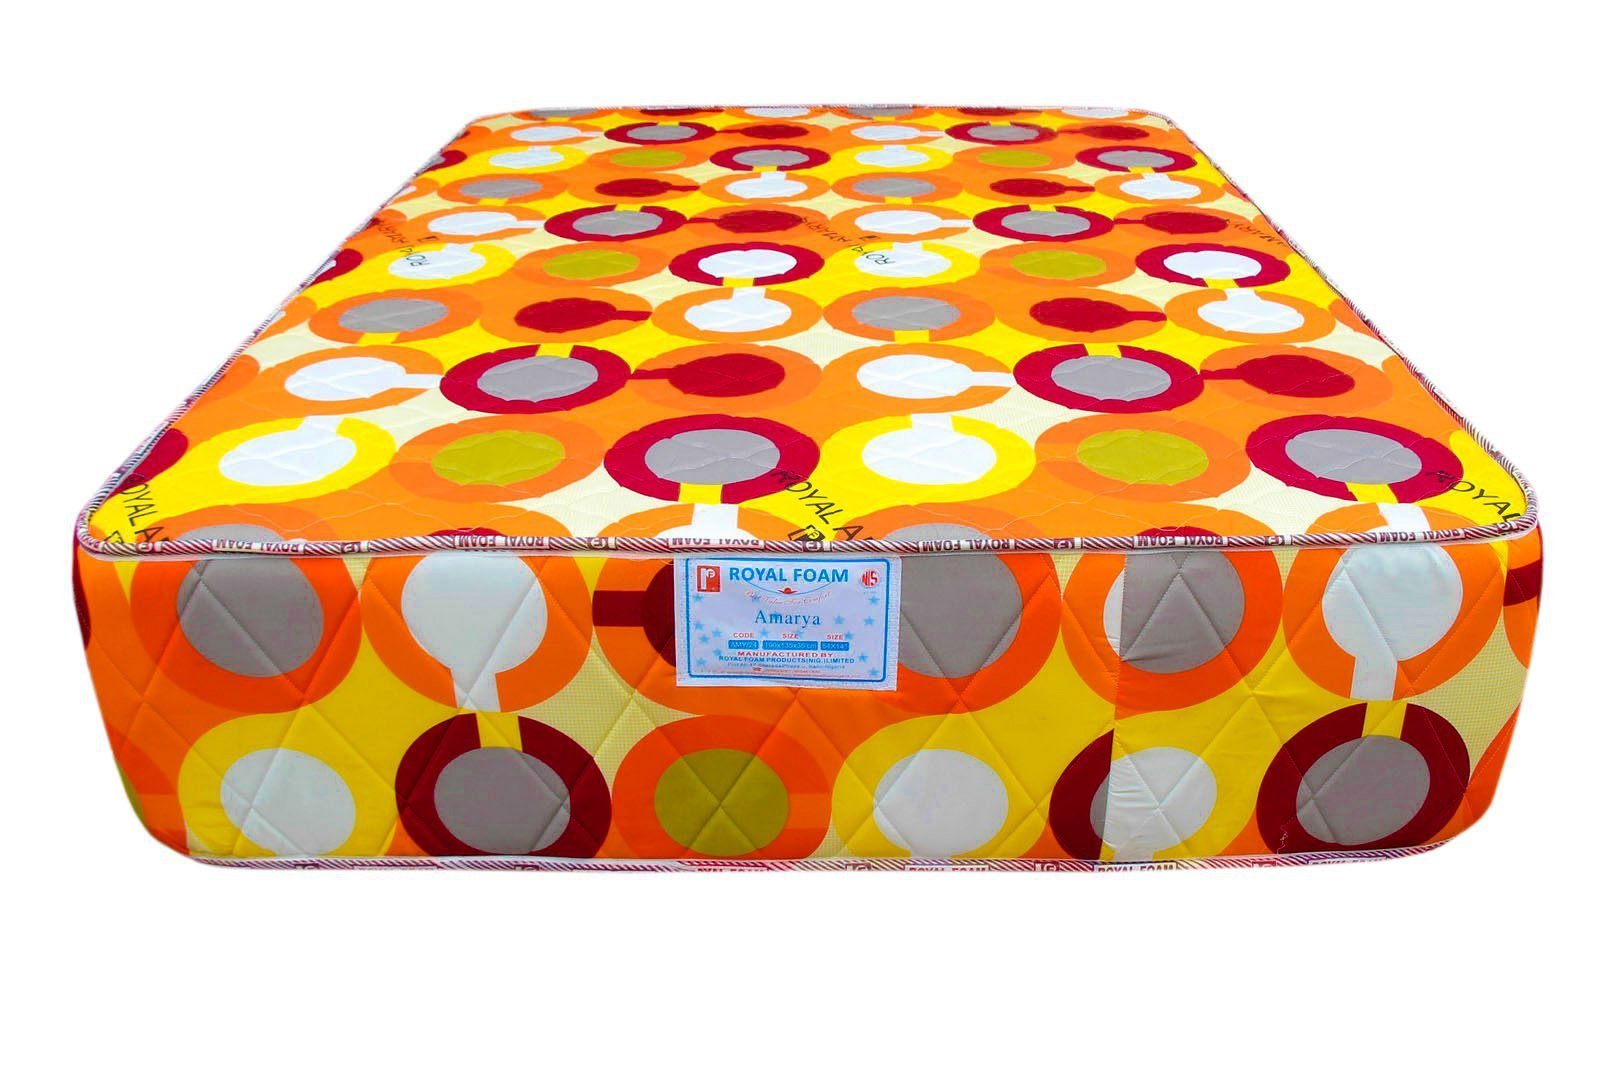 Royal Amarya-Poly Cotton Fabric - 14 Density foam - Fully Quilted Mattress -190X75X10CM [75 x 30 x 4"] [6ft x 2.5ft x 4inches]